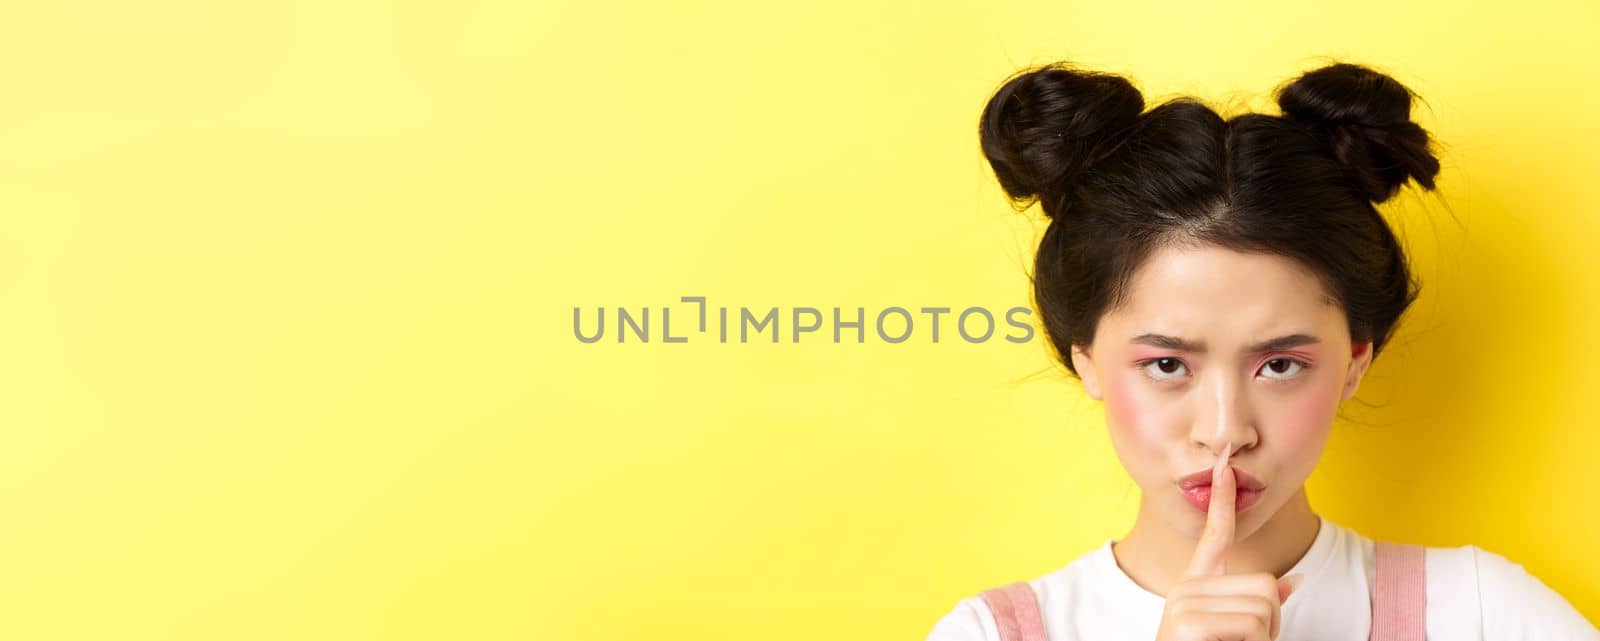 Close up portrait of angry asian girl shushing, press fingers on lips and tell be quiet, scolding loud person, need silence, telling big secret, standing on yellow background.